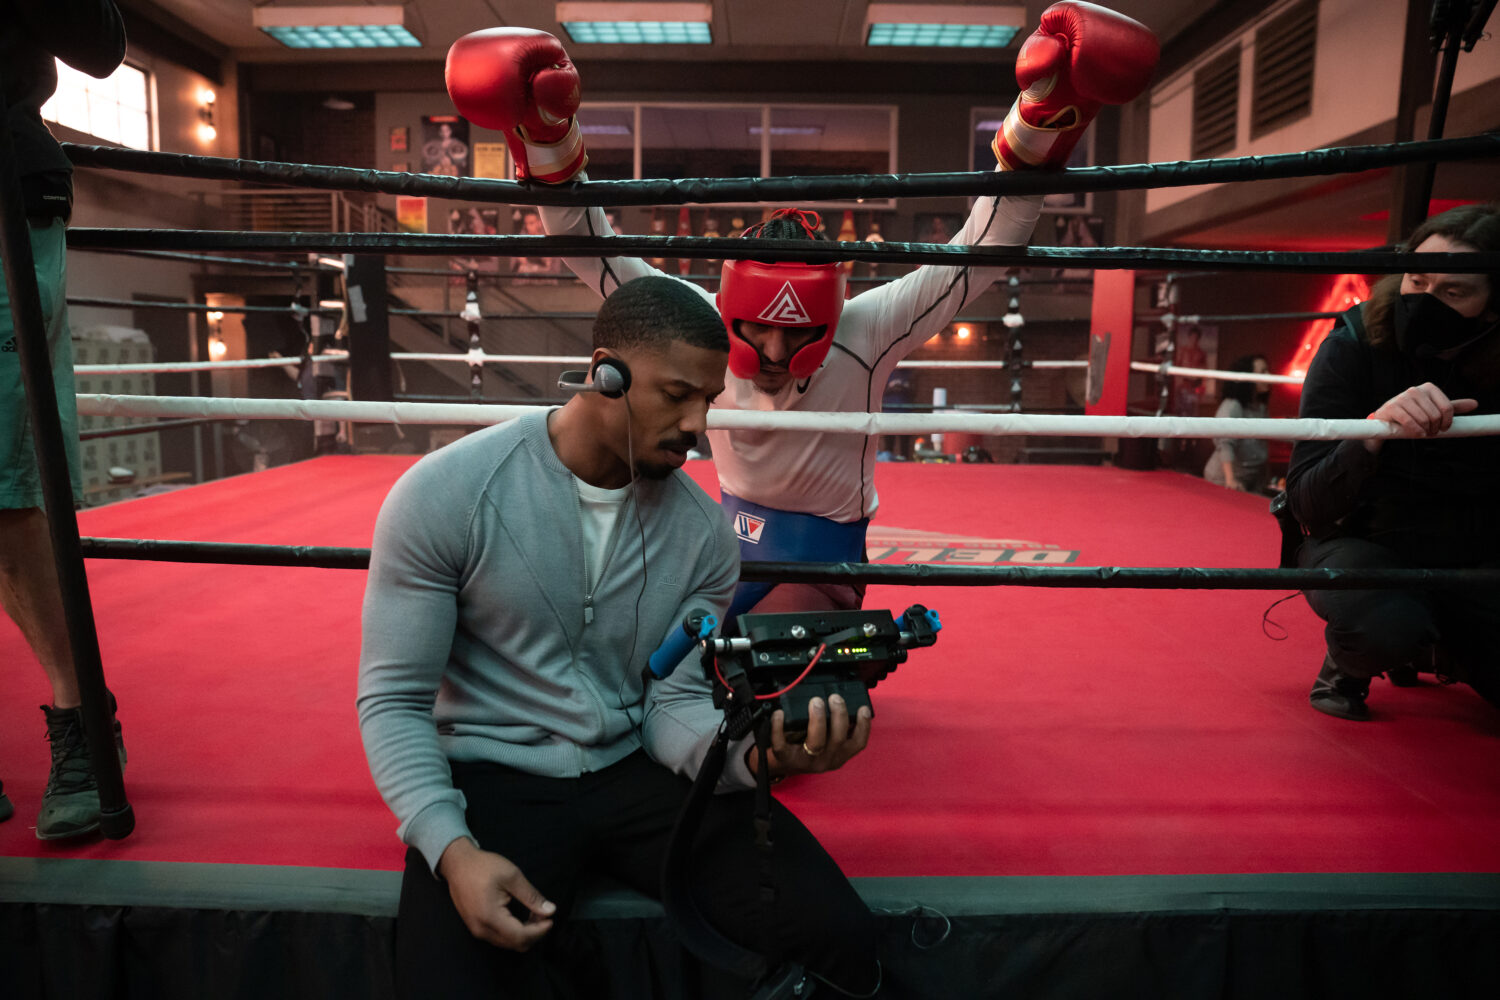 Exclusive: MBJ & J Majors Talk Life-Changing Roles In 'Creed 3